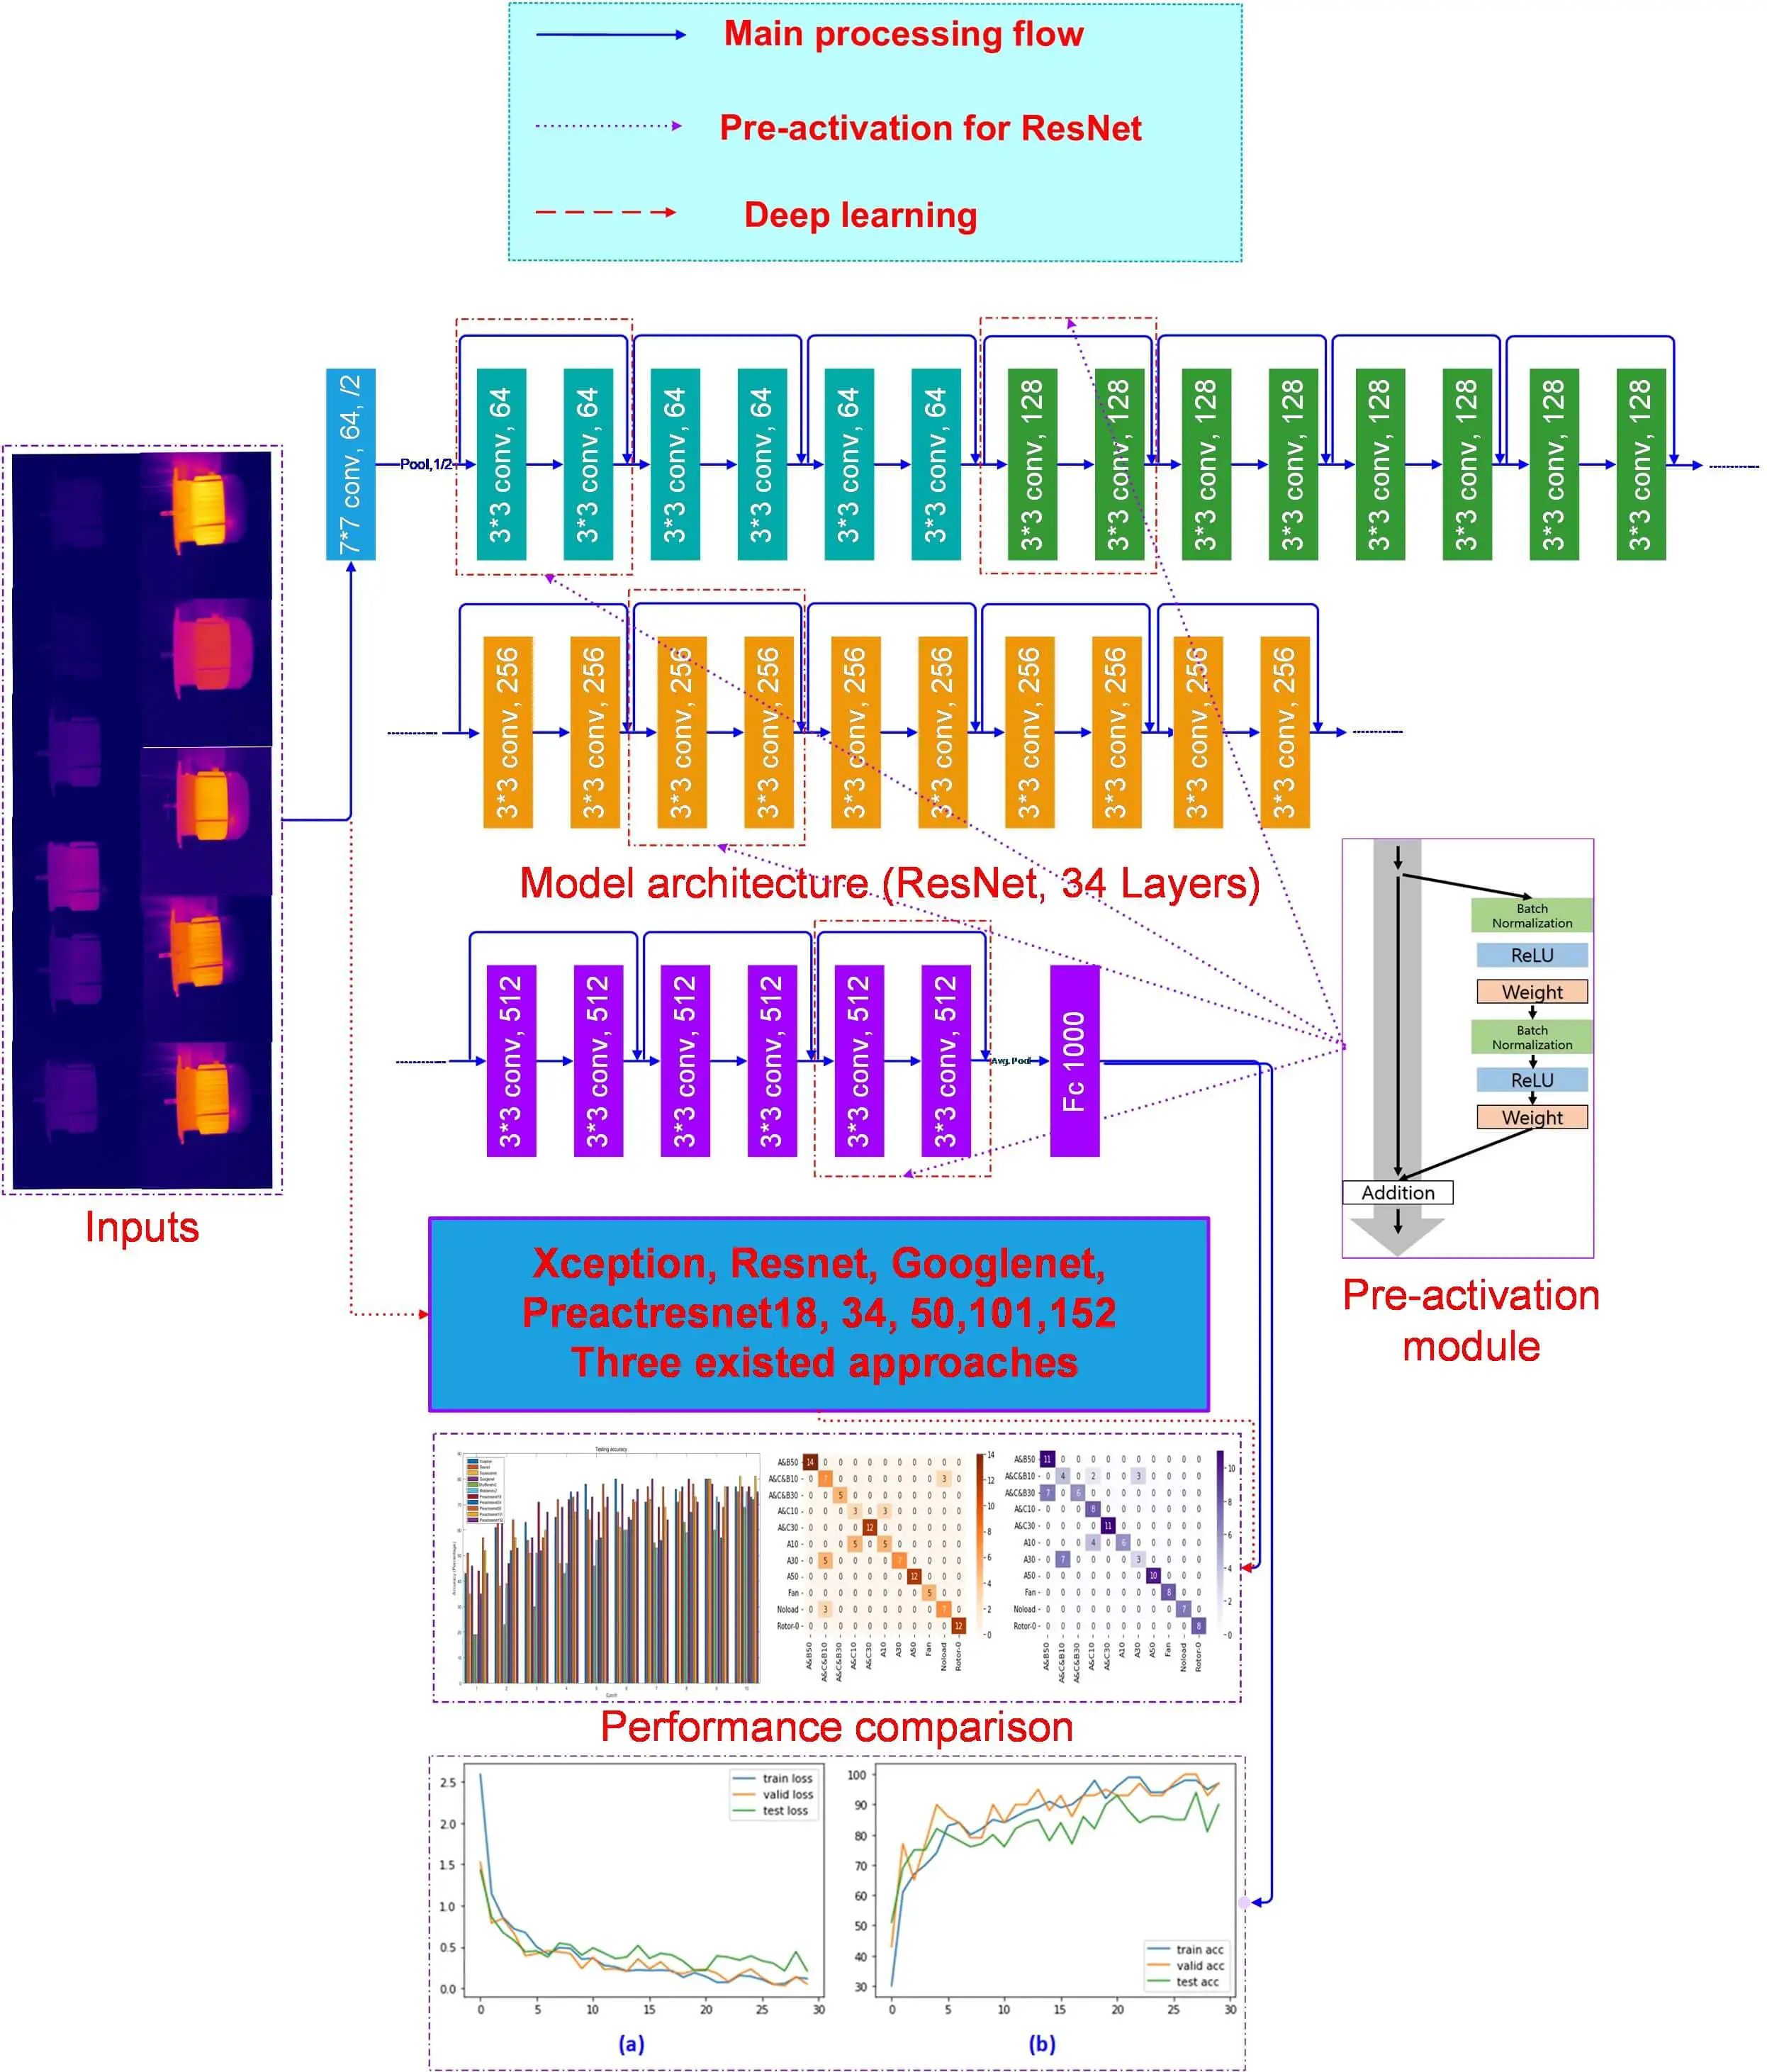 Fault Diagnosis of Industrial Motors with Extremely Similar Thermal Images Based on Deep Learning-Related Classification Approaches